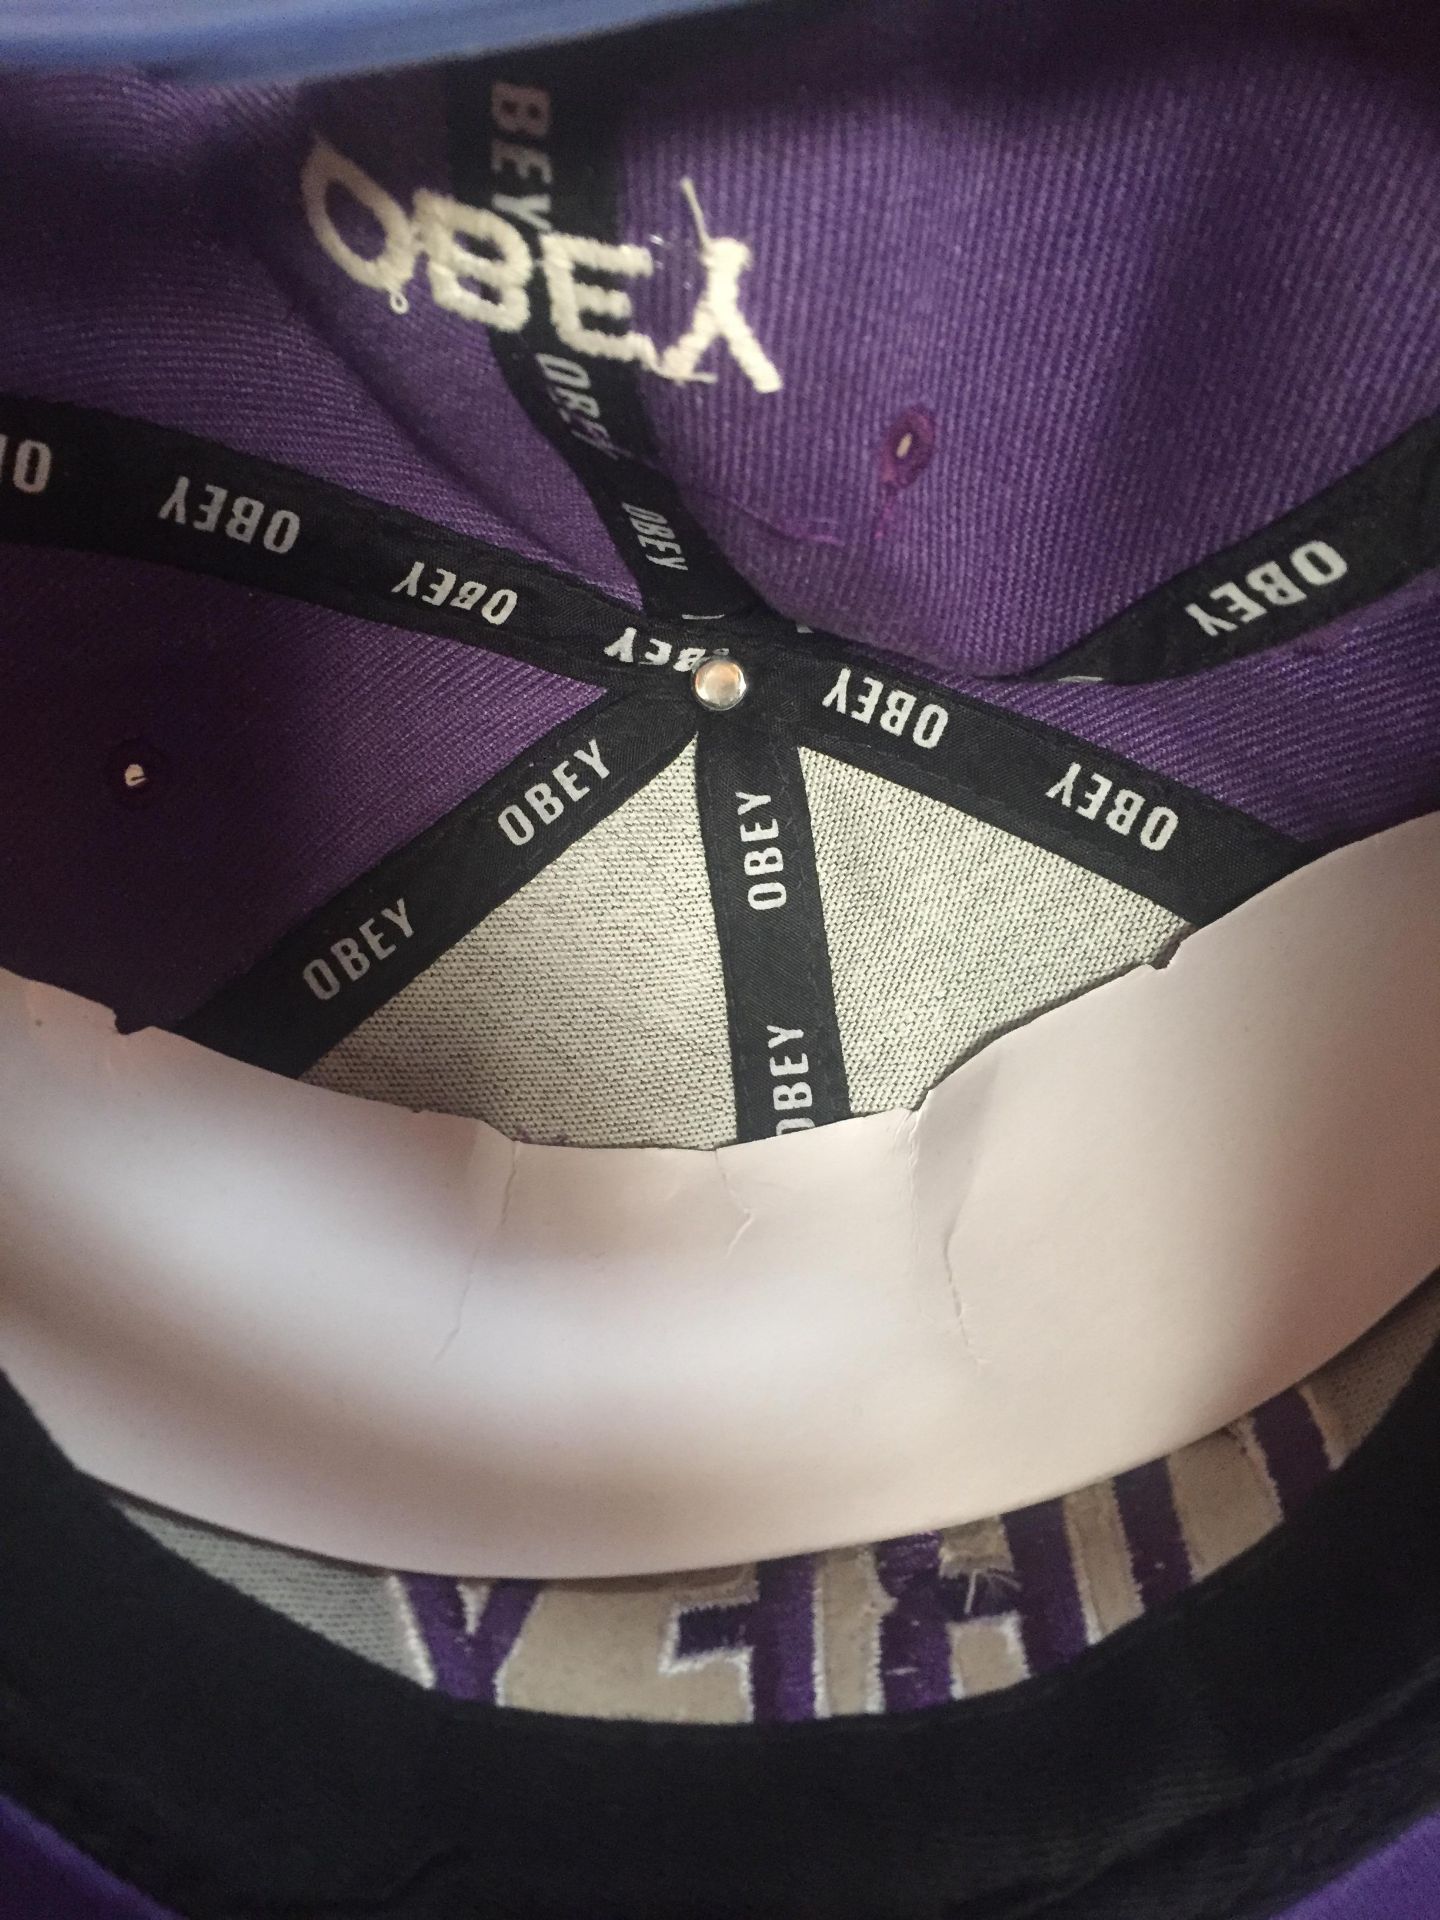 100 Purple Obey style hats - Image 4 of 4